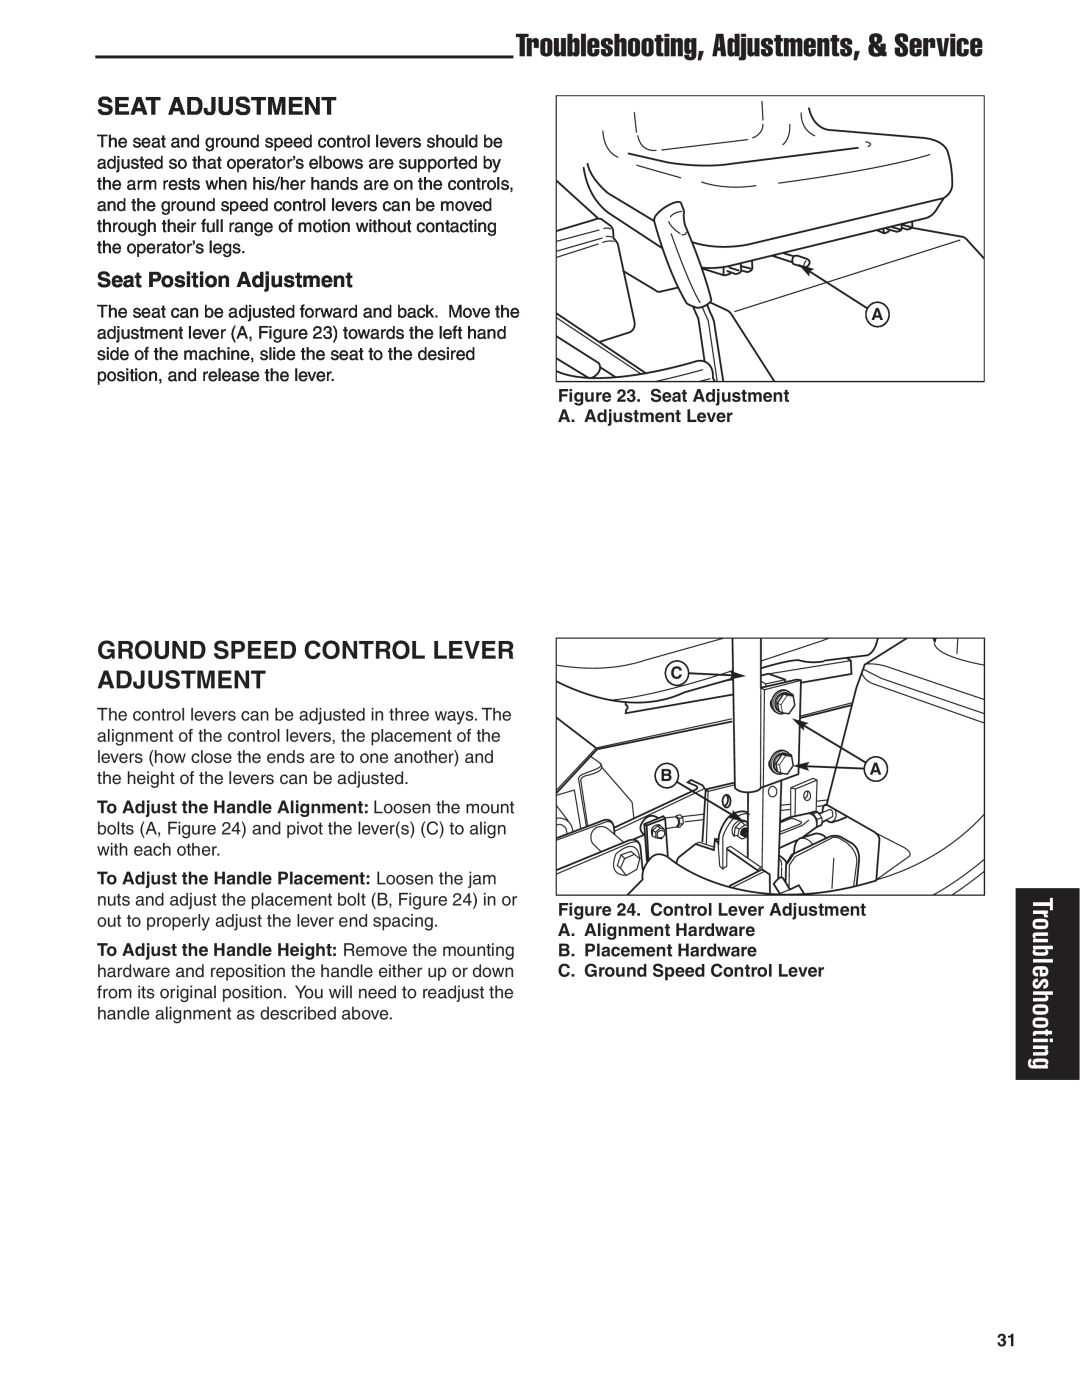 Snapper 18HP user manual Troubleshooting, Adjustments, & Service, Seat Adjustment, Ground Speed Control Lever Adjustment 